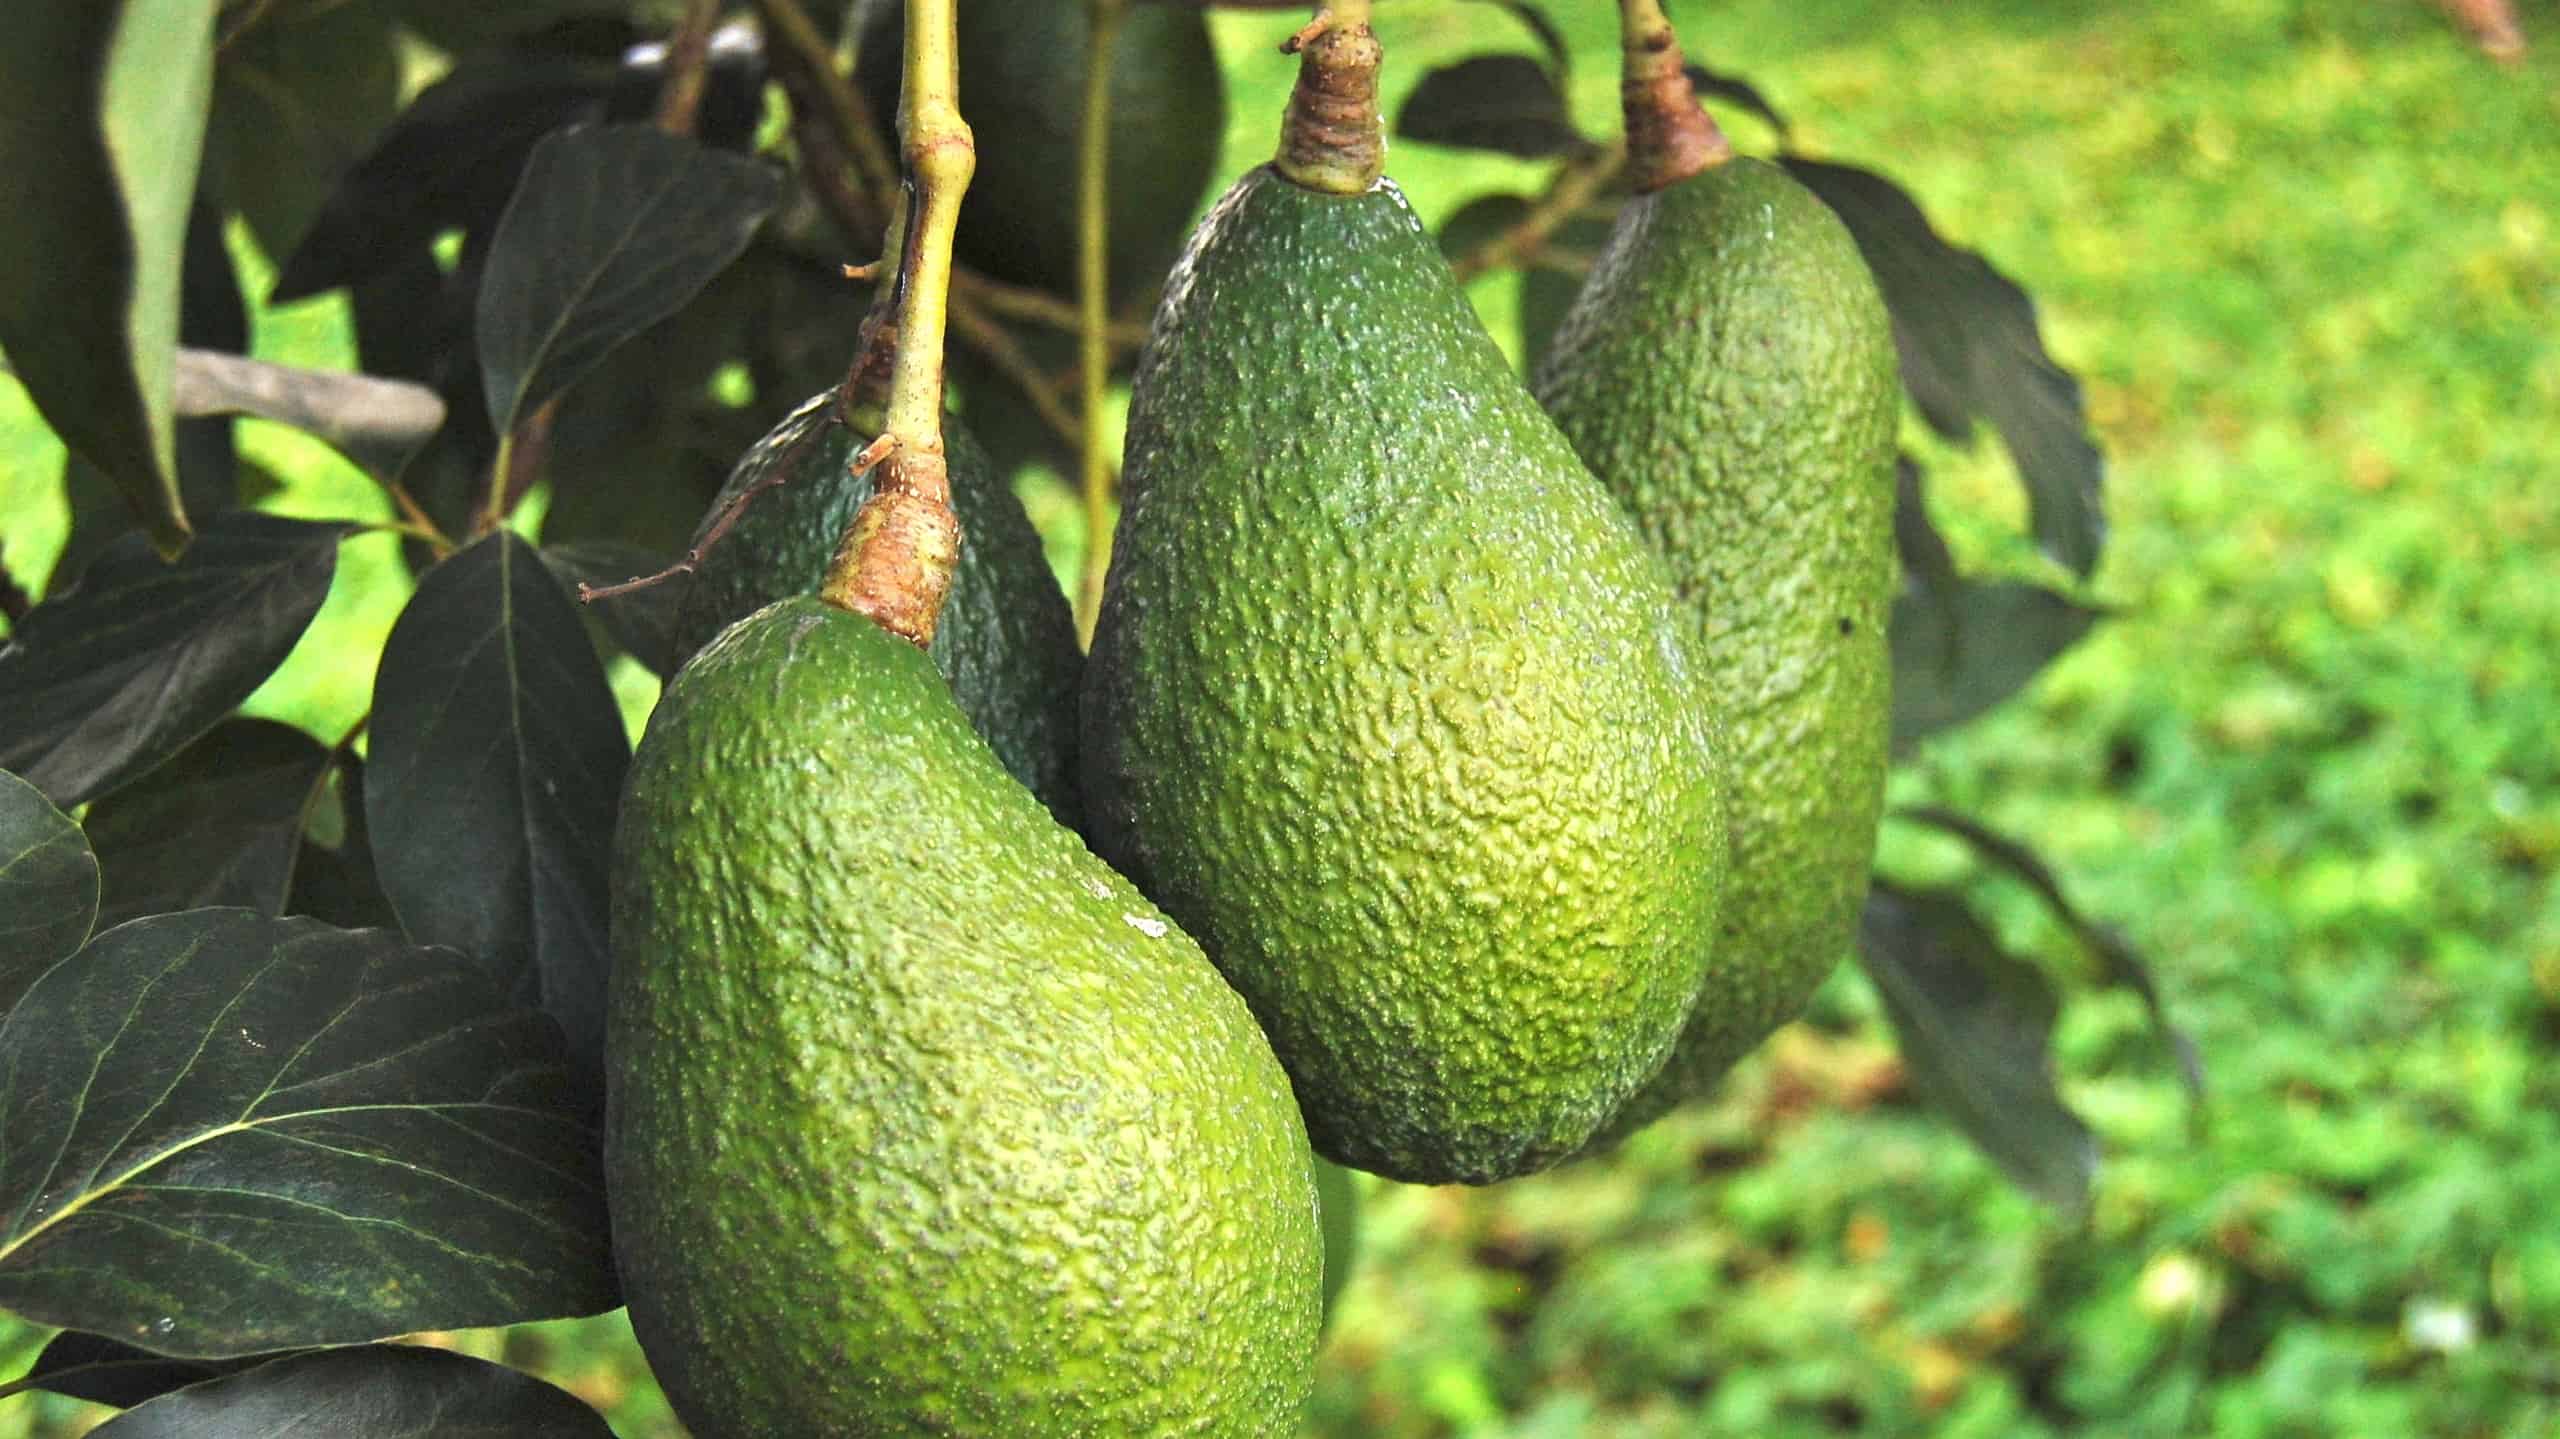 Three avocados are visible center frame growing on a tree, Green background.